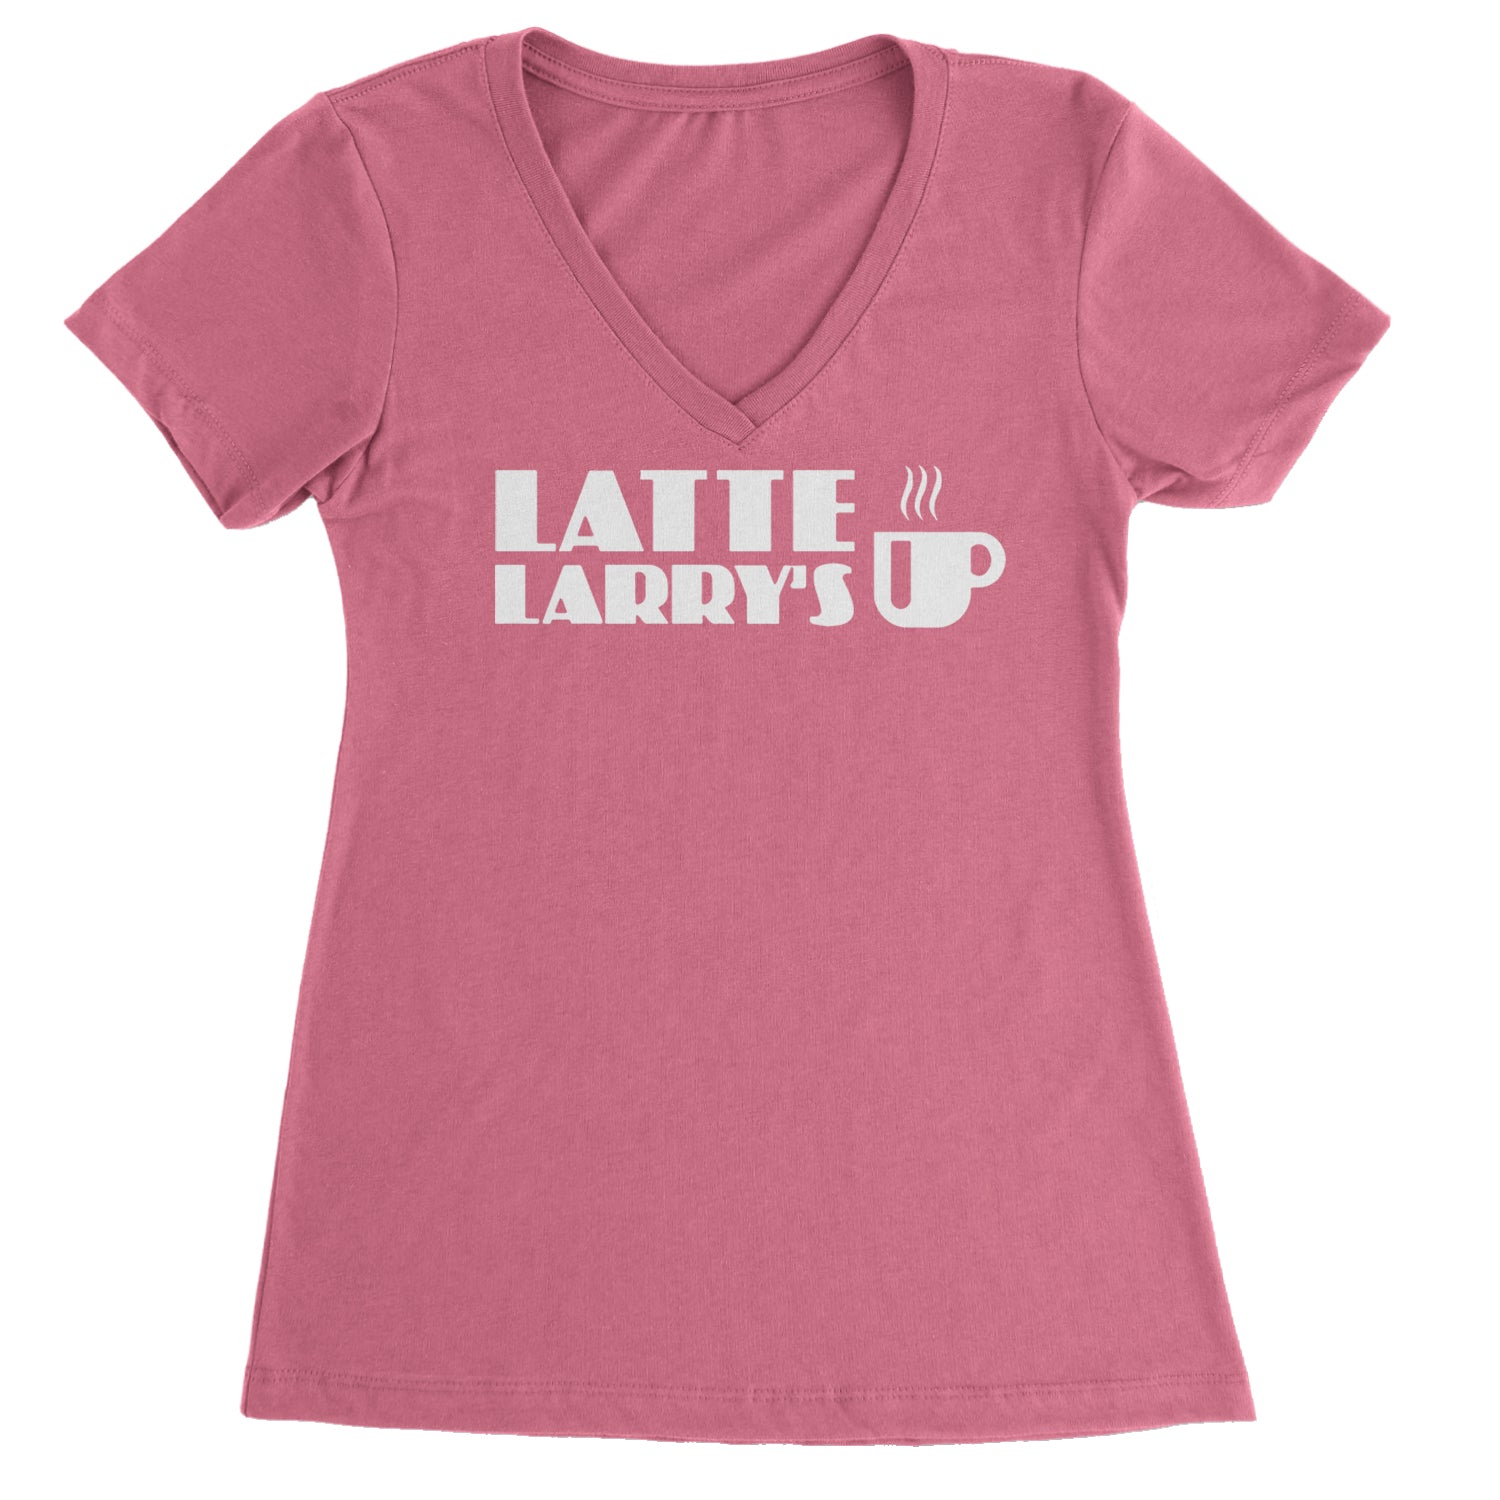 Latte Larry's Enthusiastic Coffee Ladies V-Neck T-shirt Hot Pink